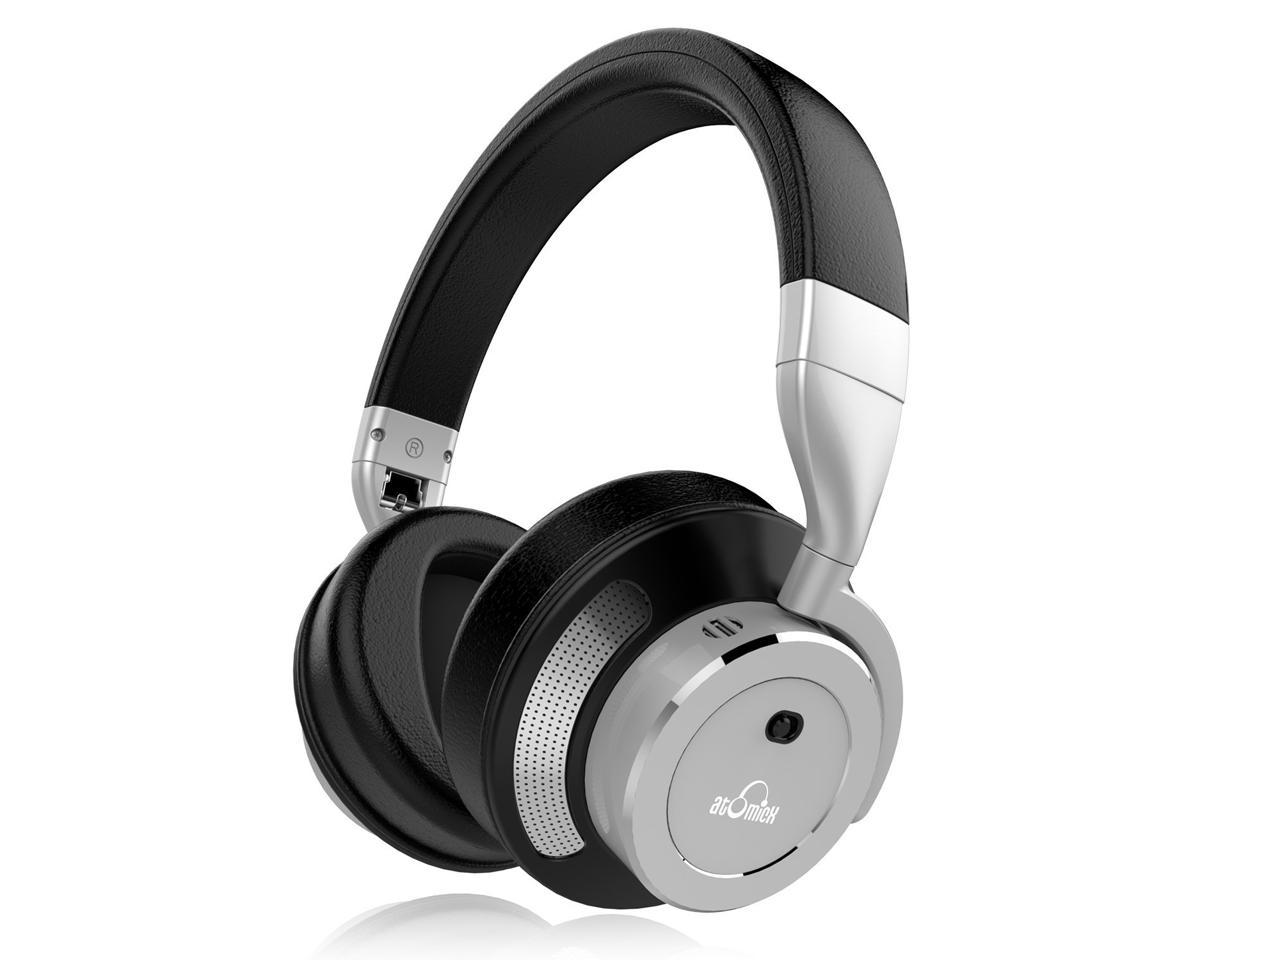 iDeaUSA V200S Active Noise Cancelling ANC Bluetooth Headphone Over Ear HiFi Wireless Headphones with Mic up to 16 Hours Play Time